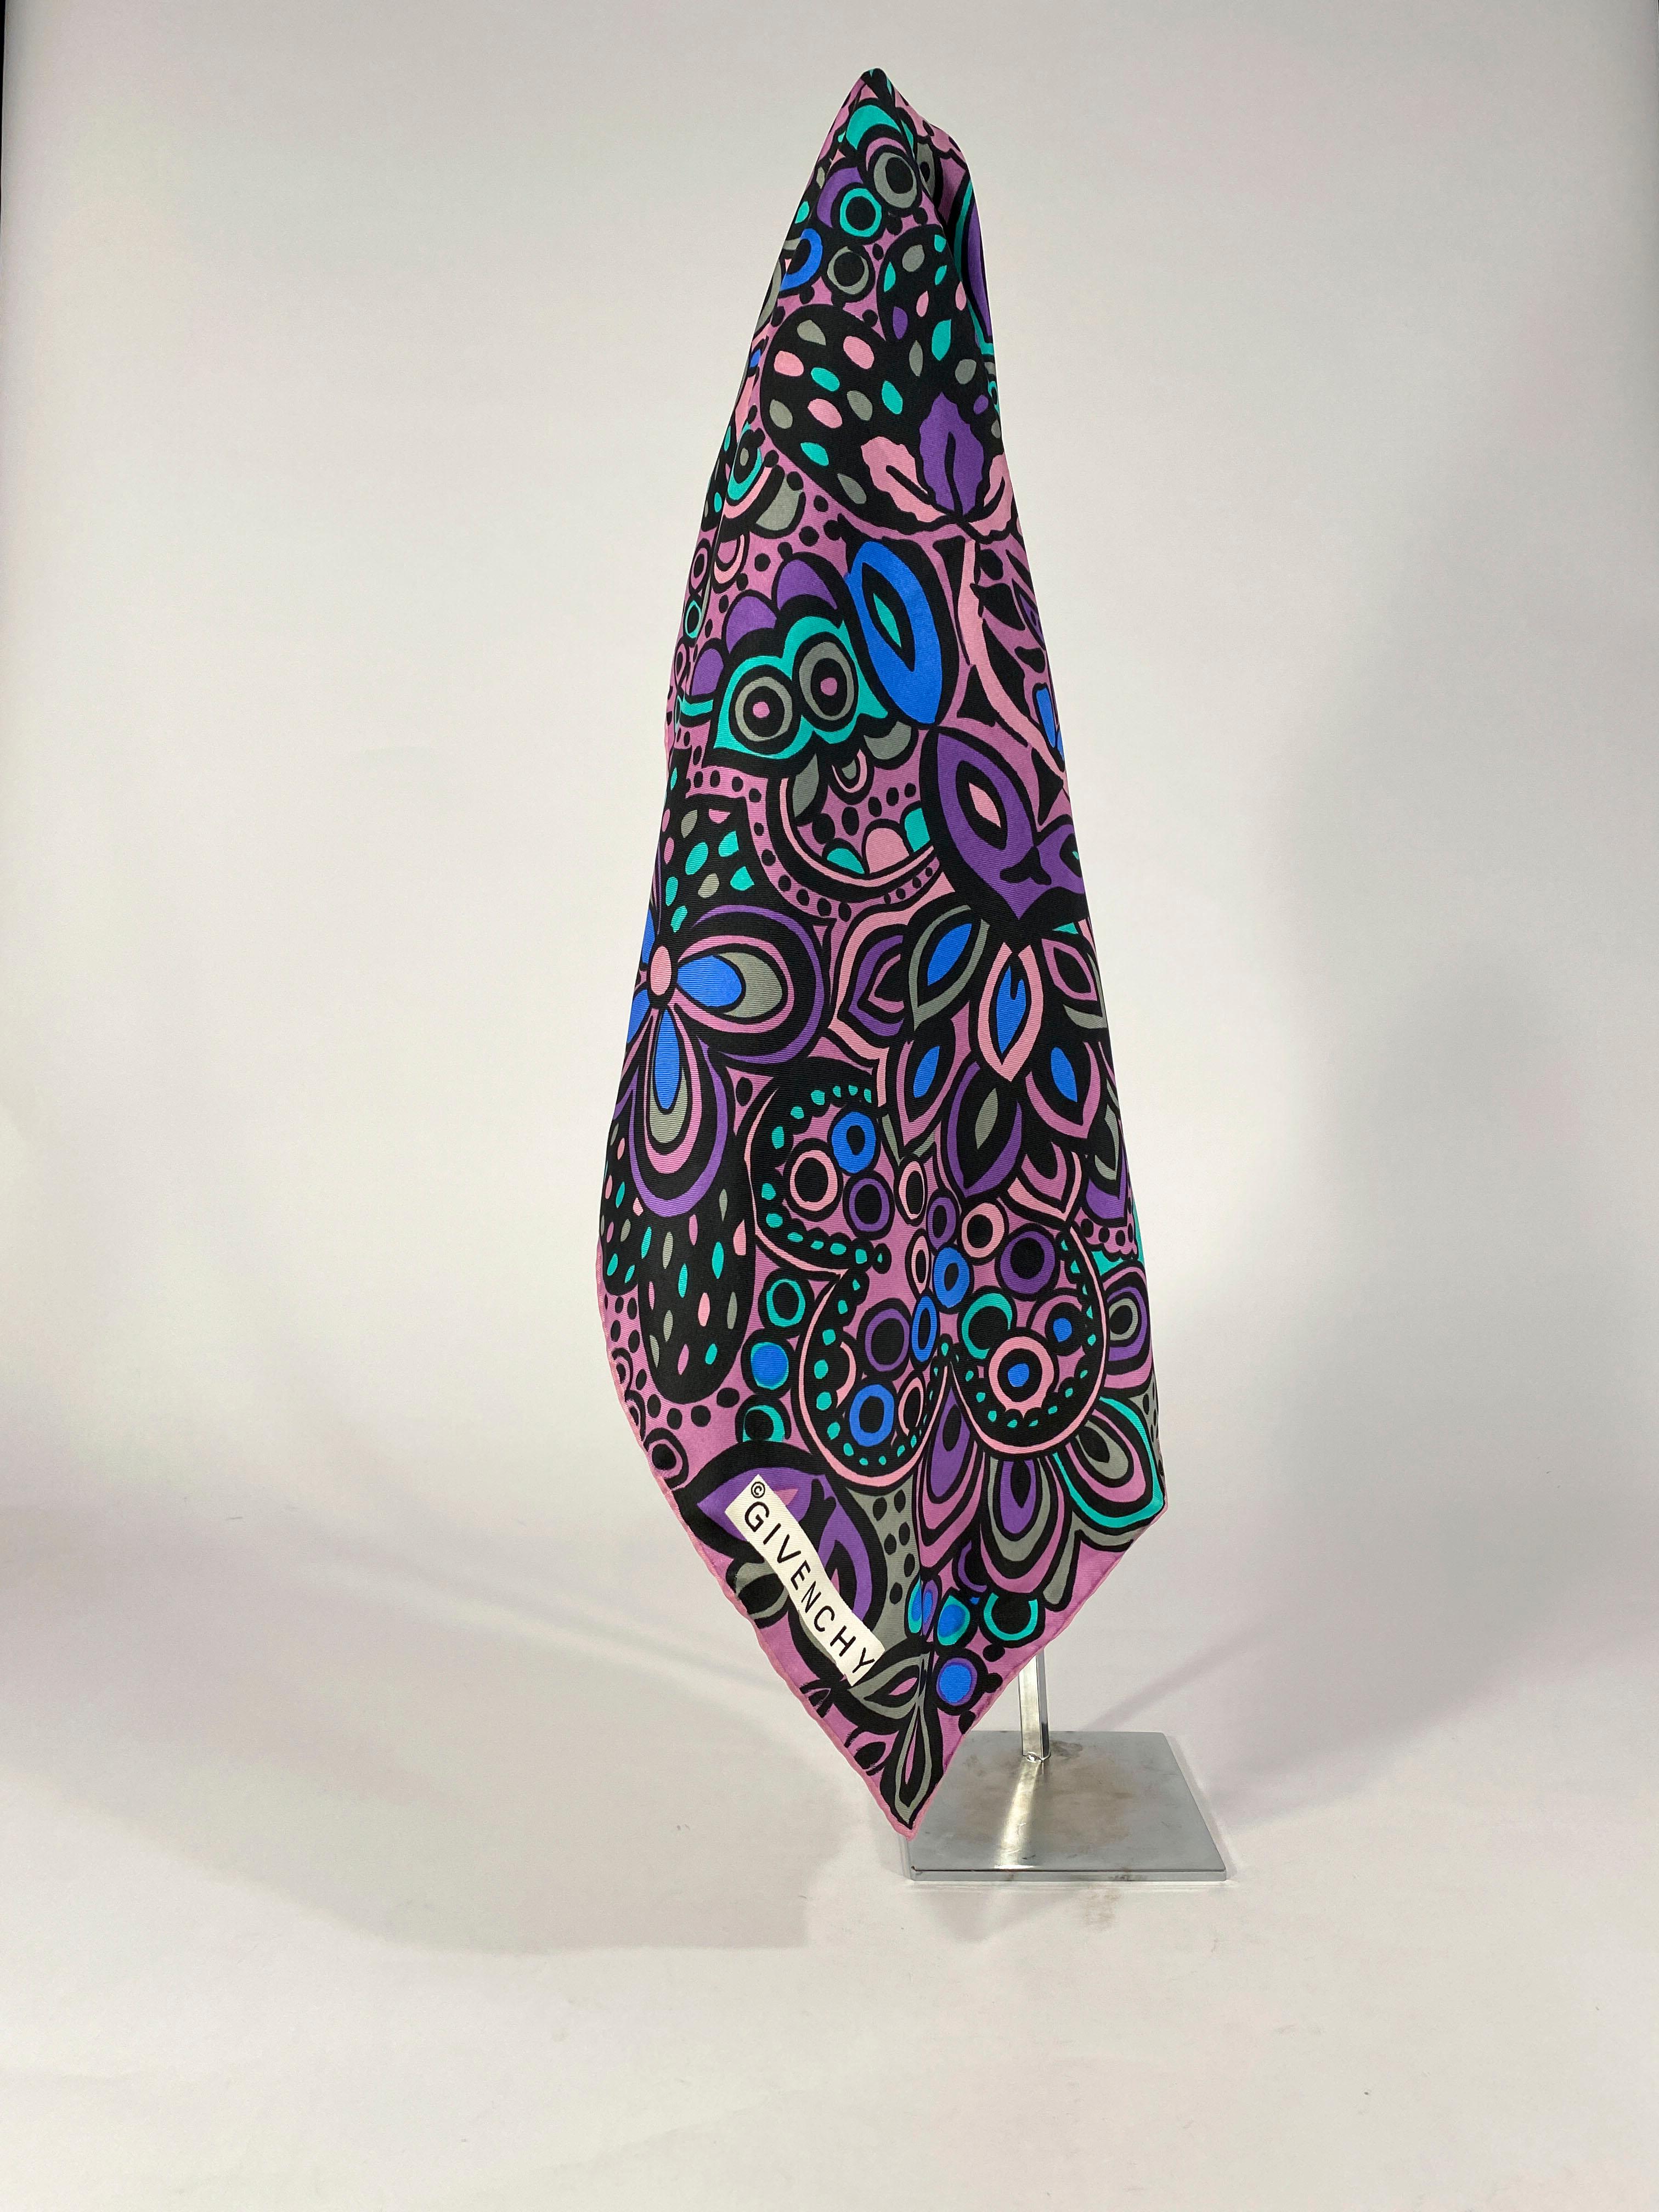 1960s Givenchy silk scarf featuring a psychedelic whimsical print in teal, blue, black, grey, and several shades of purple and lavender. The edges are hand-rolled.